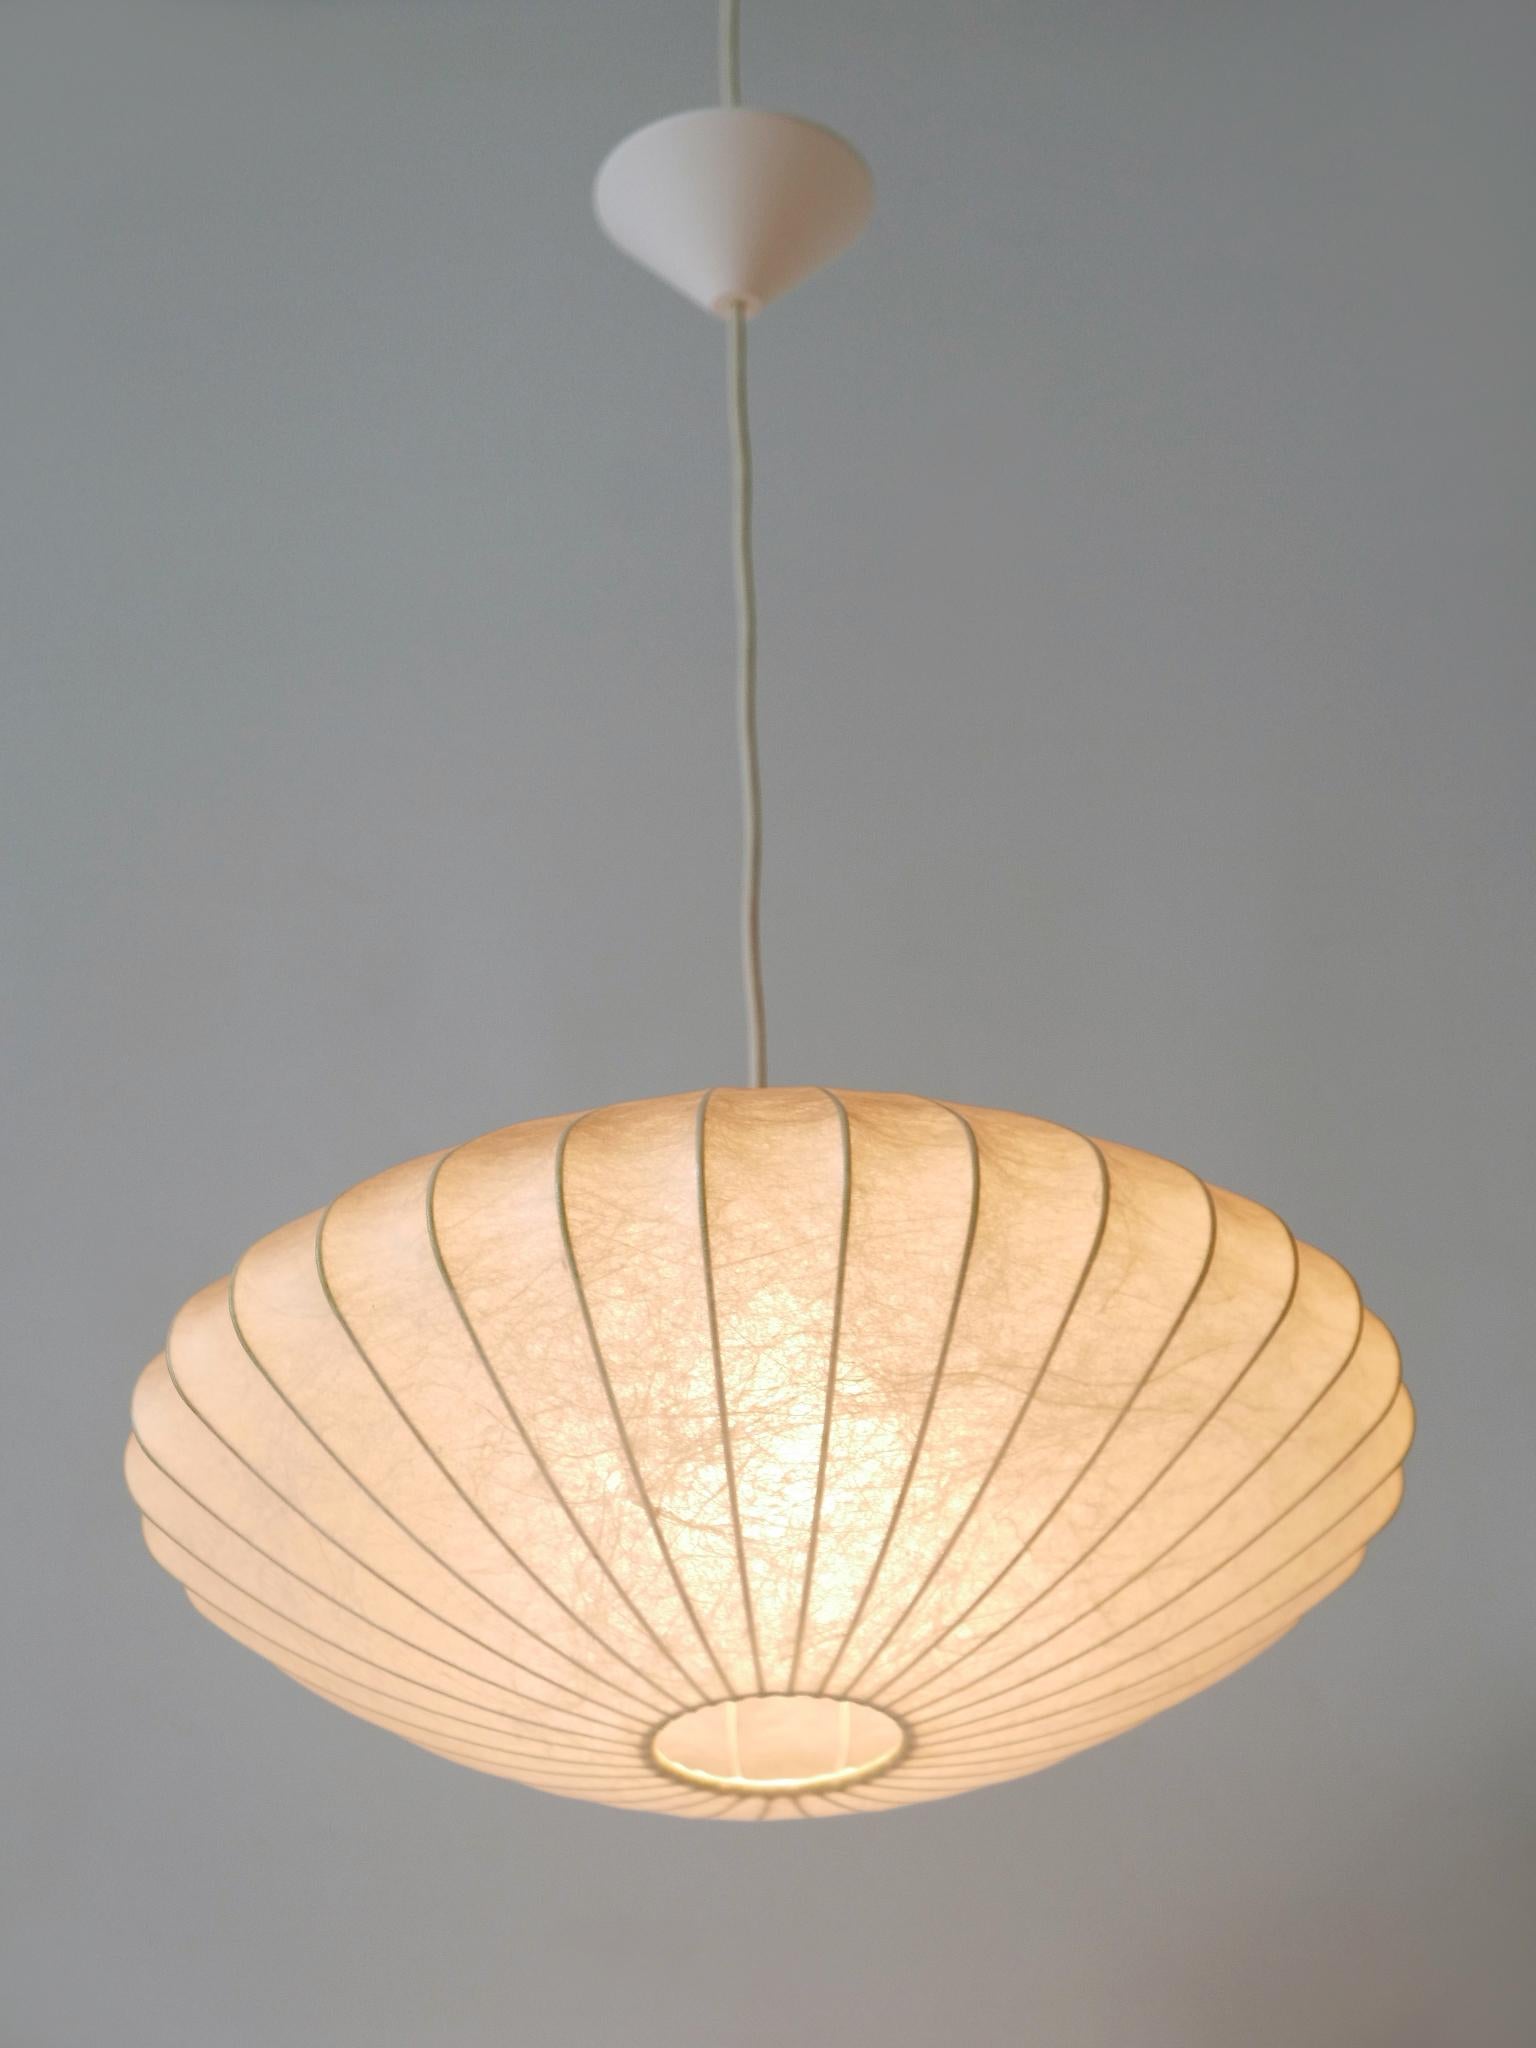 Rare Mid-Century Modern Cocoon Pendant Lamp or Hanging Light by Goldkant 1960s In Good Condition For Sale In Munich, DE